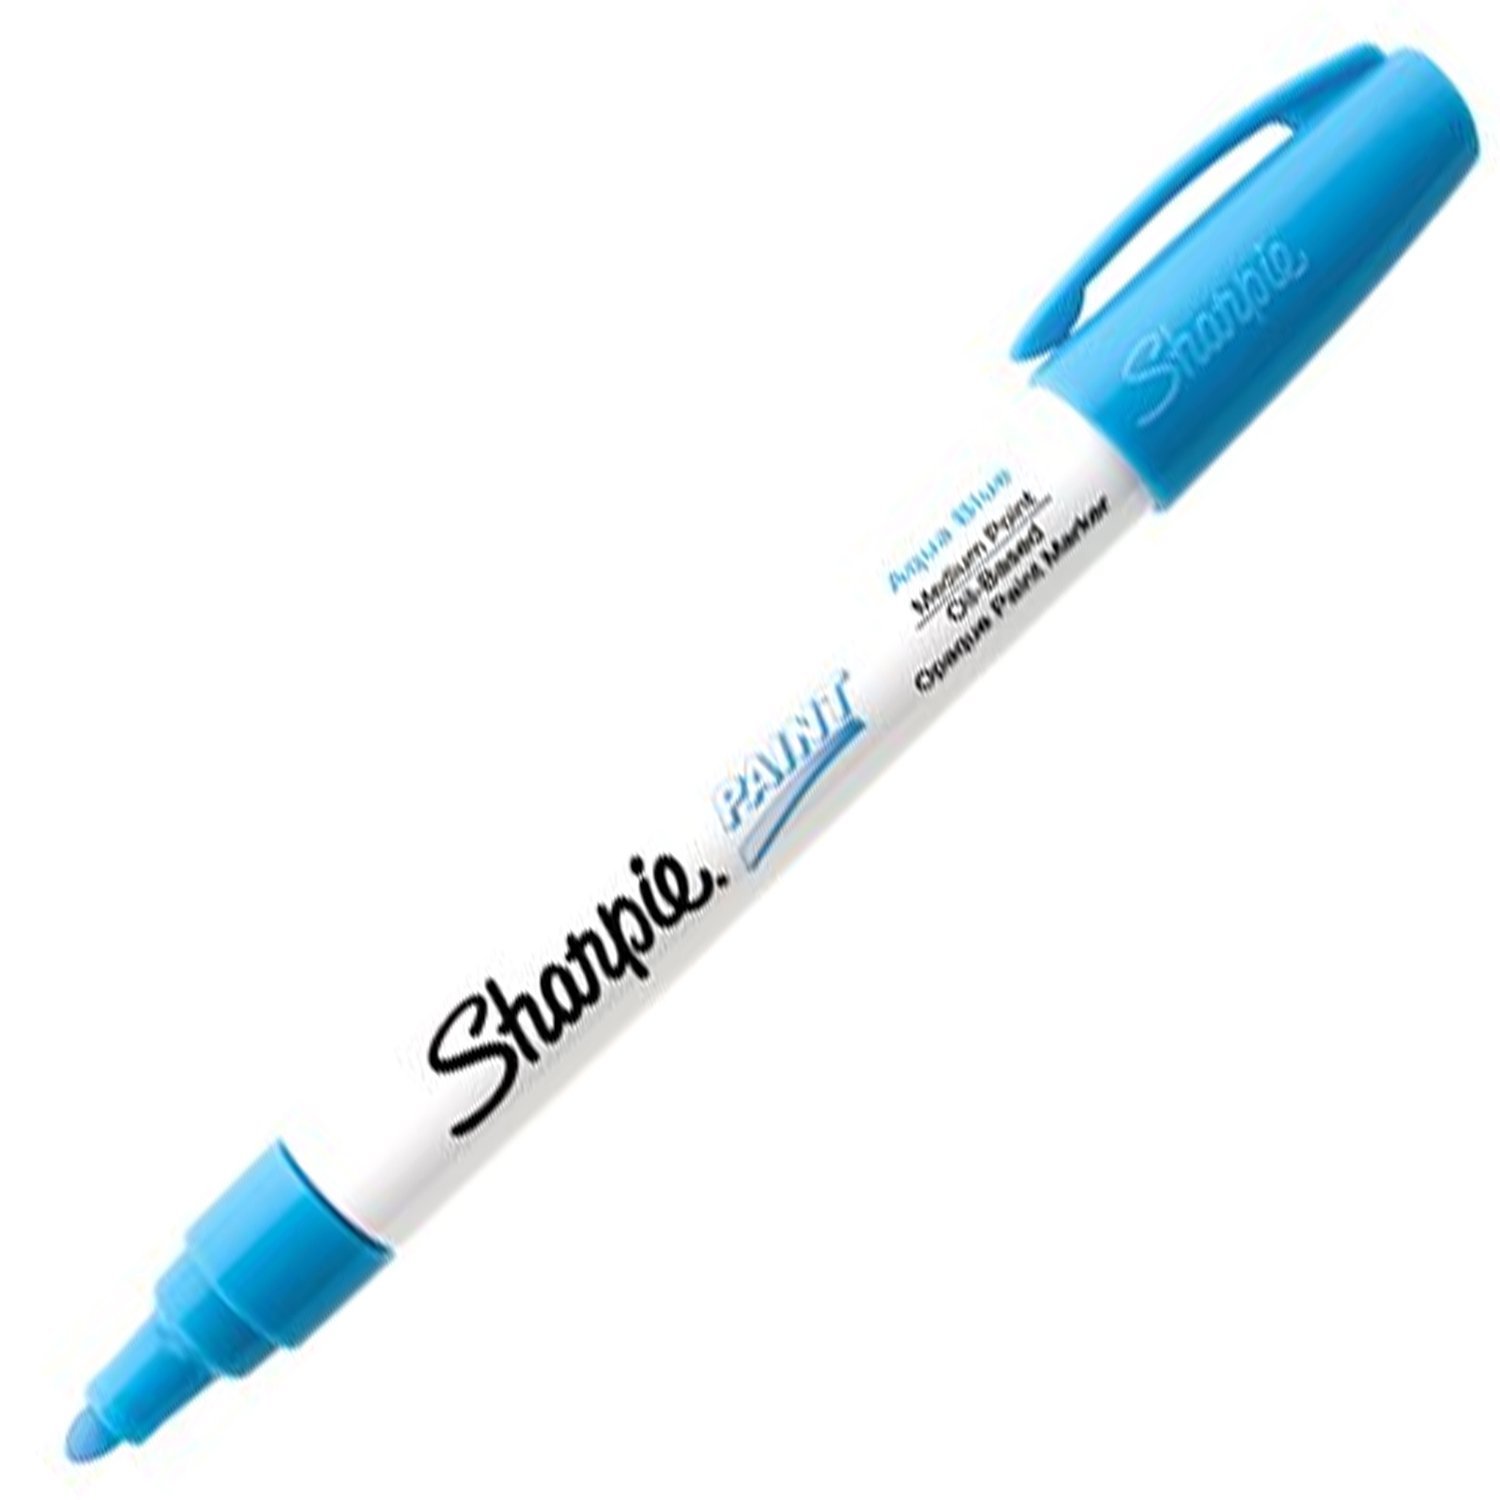 SHARPIE Oil-Based Paint Marker, Medium Point, Aqua Blue, 1 Count - Great for Rock Painting